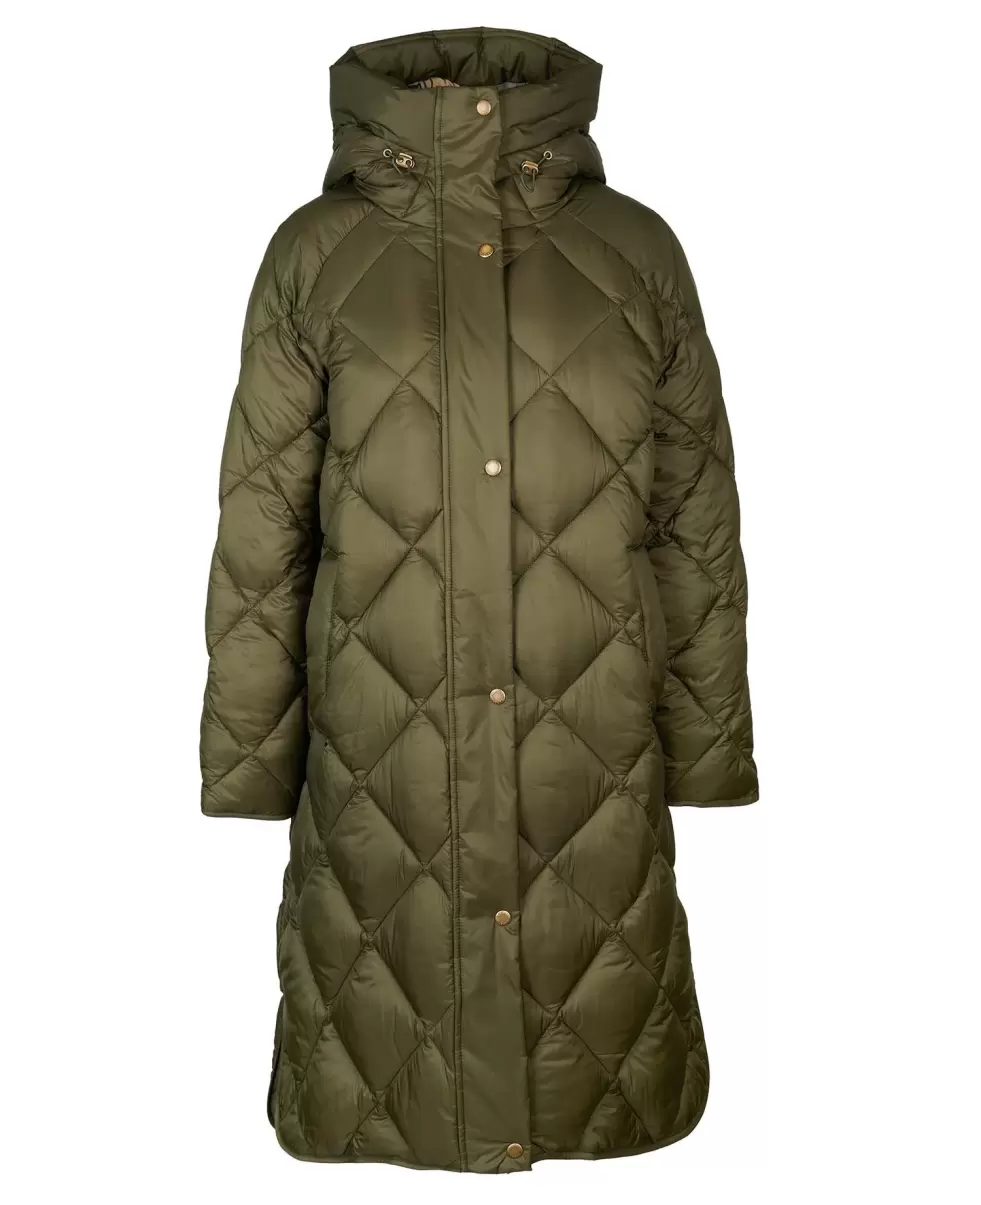 Barbour Sandyford Quilted Jacket Women Cutting-Edge Sage/Ancient Quilted Jackets - 1